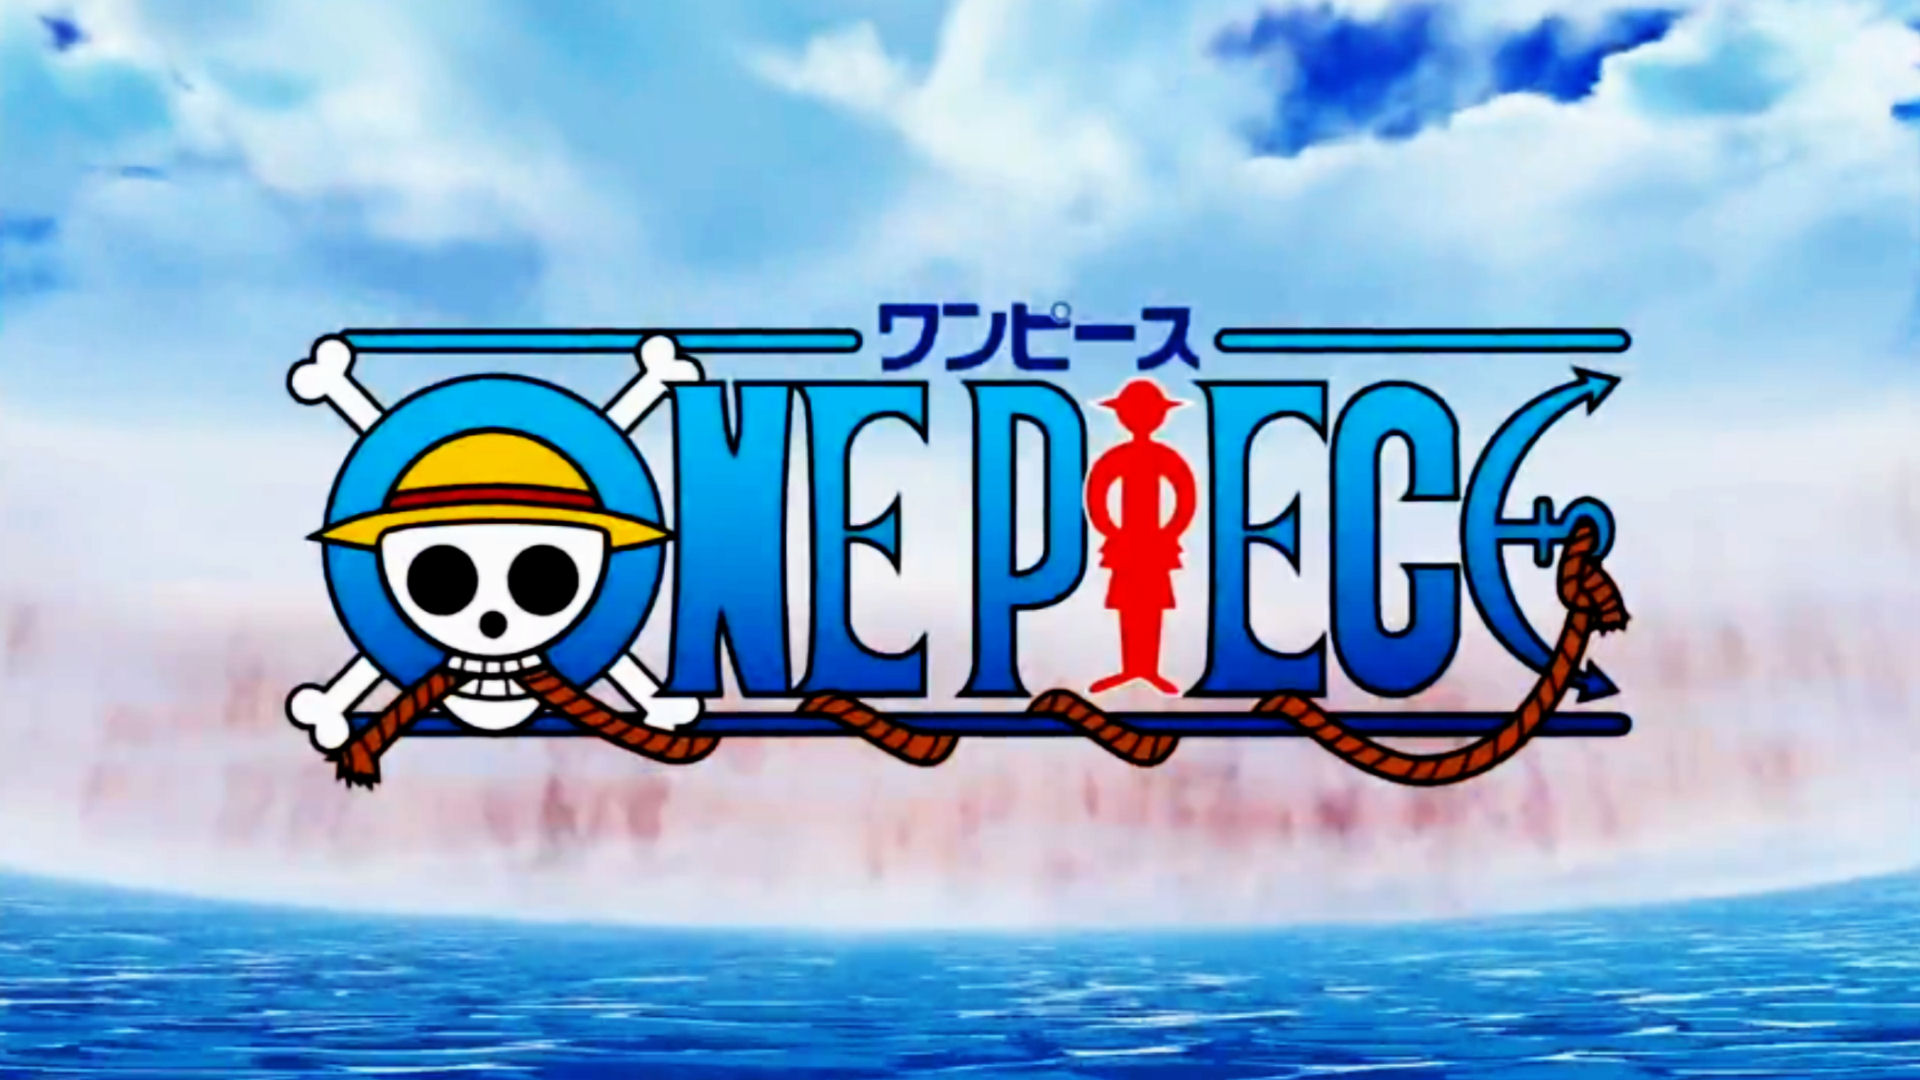 High Resolution Best Anime One Piece Wallpaper HD 16 Full Size ...